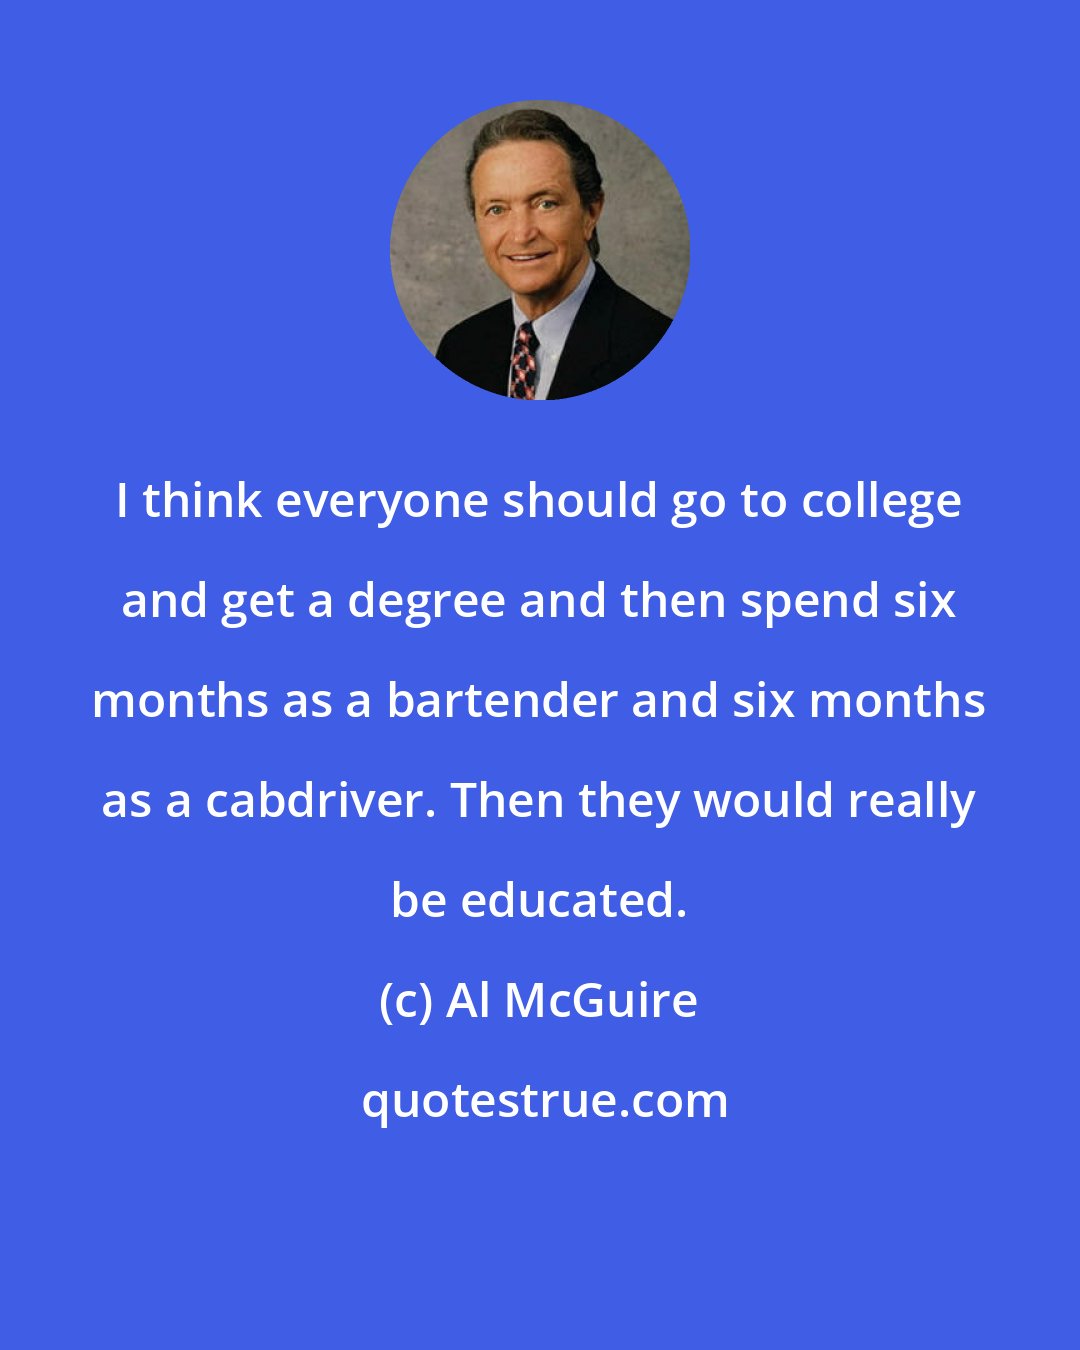 Al McGuire: I think everyone should go to college and get a degree and then spend six months as a bartender and six months as a cabdriver. Then they would really be educated.